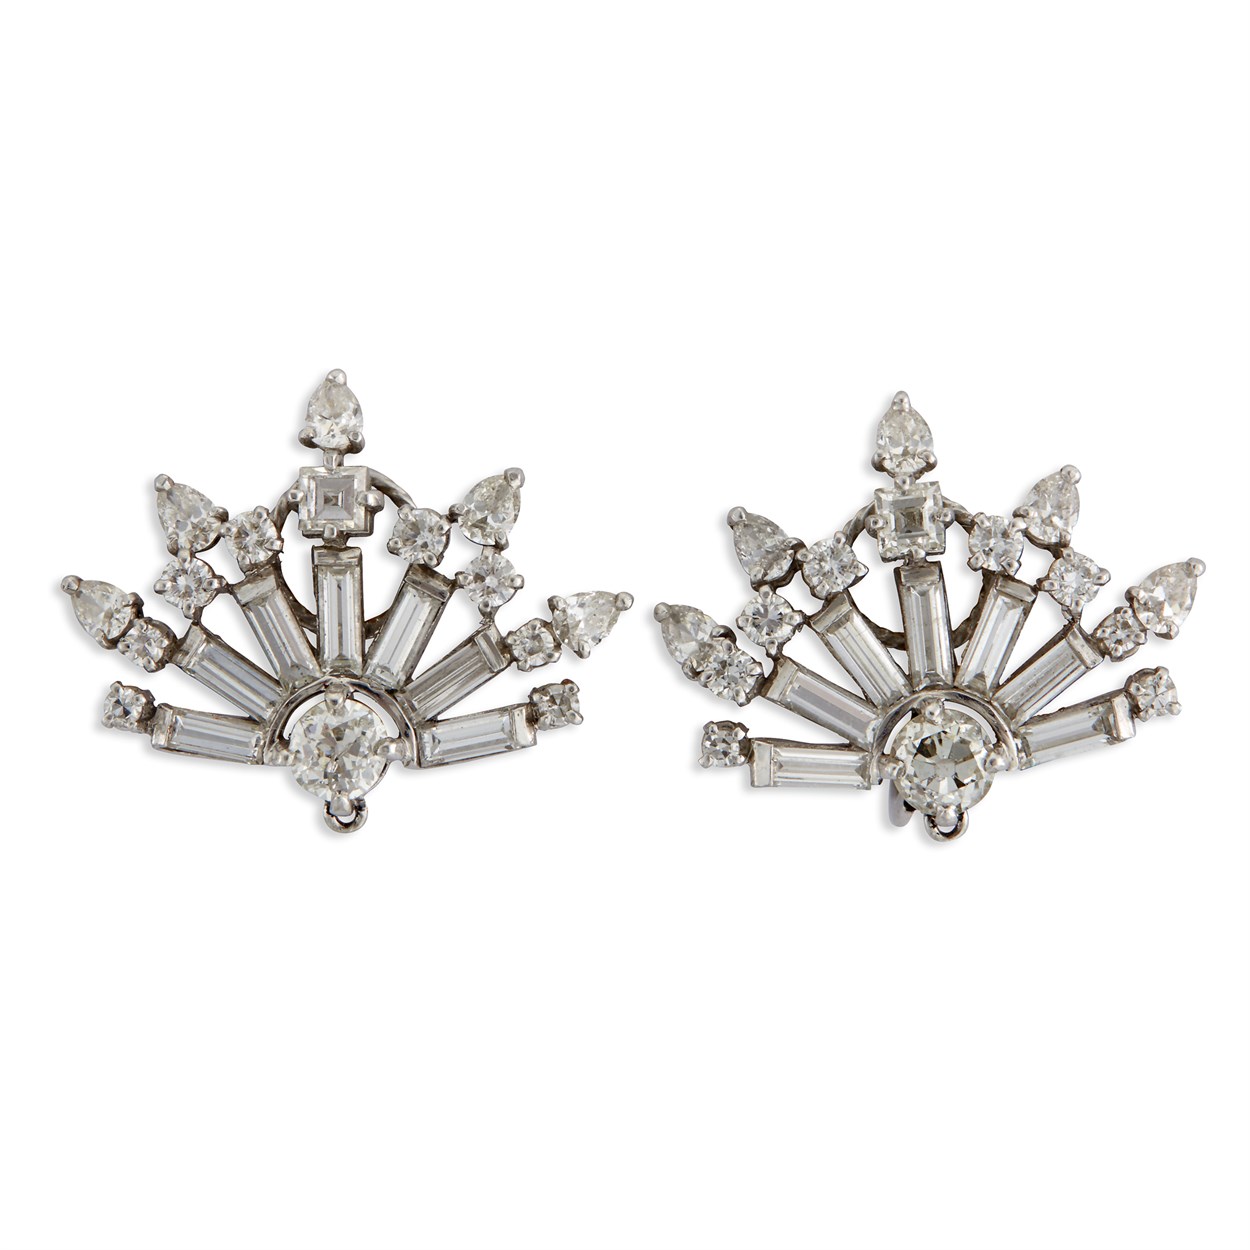 Lot 13 - A pair of diamond and platinum ear clips